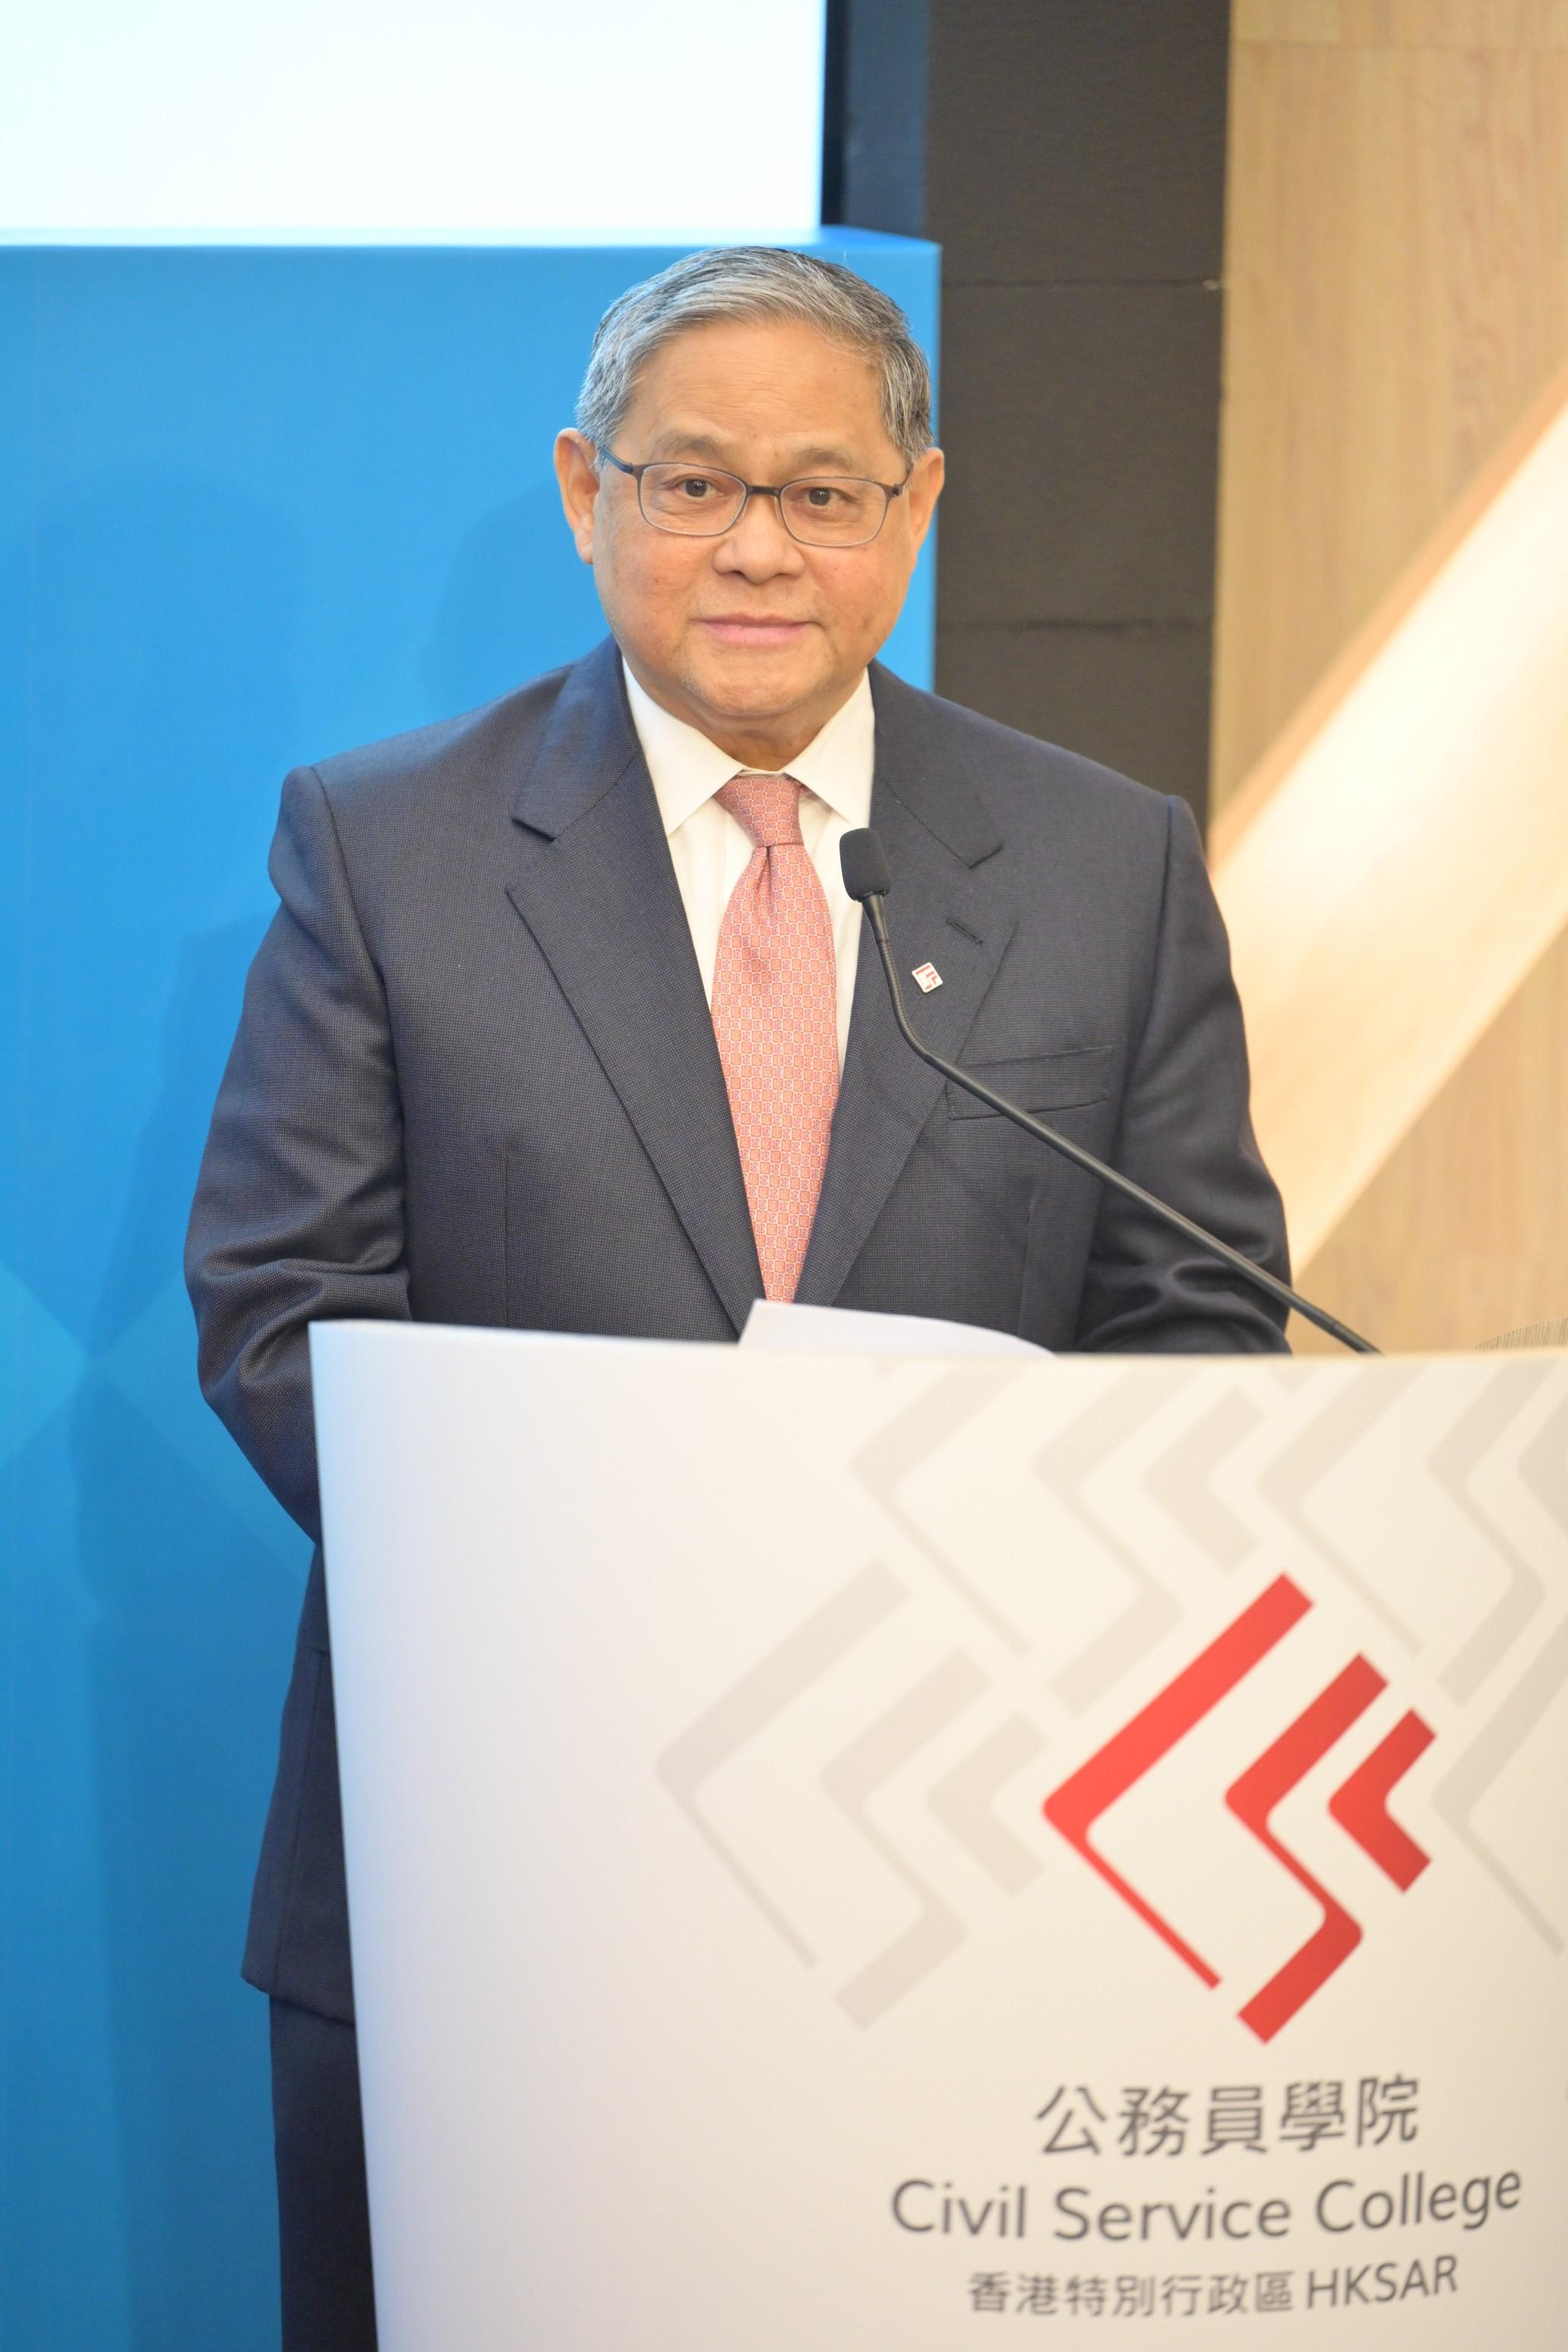 The Civil Service College of the Hong Kong Special Administrative Region was established today (December 9), marking a new milestone for training and development for the civil service. Photo shows the Chairman of the Civil Service Training Advisory Board, Dr Victor Fung, delivering a speech at the establishment ceremony. 